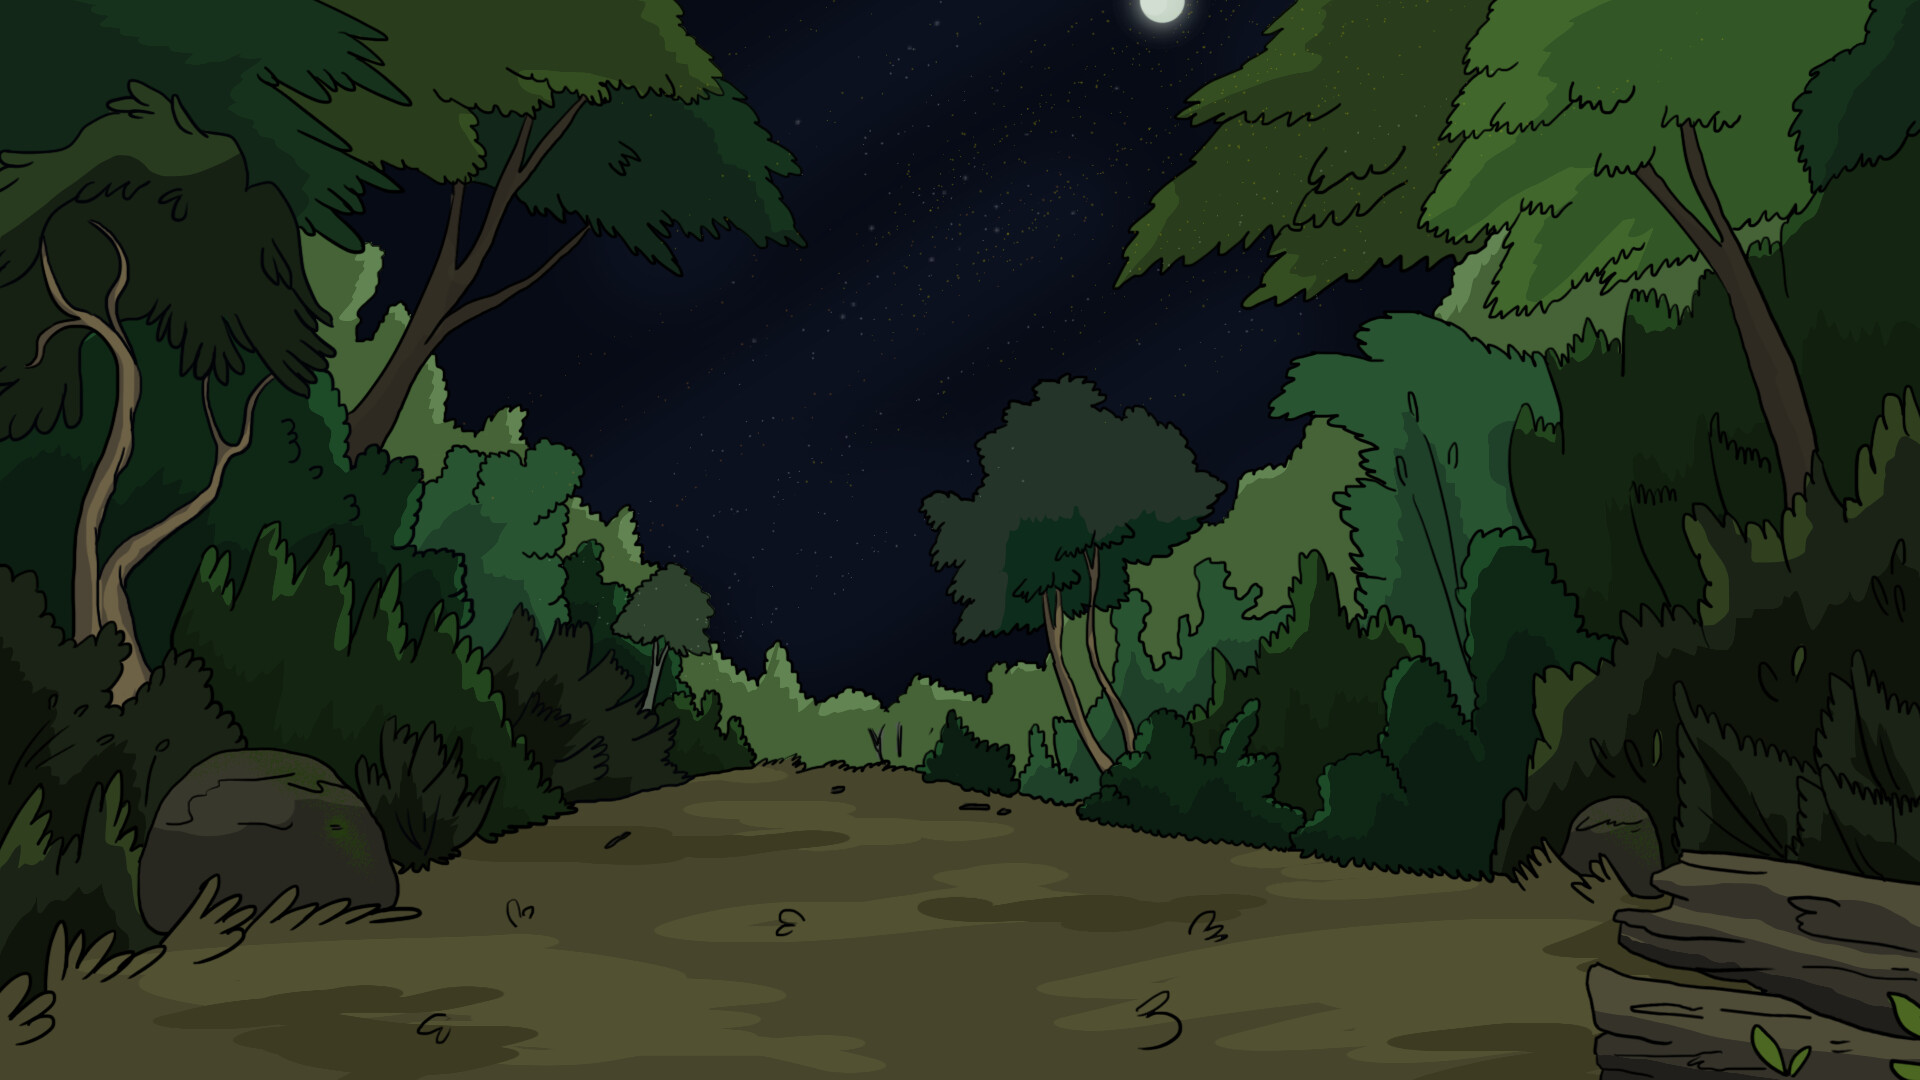 ArtStation - Animation Background - Night at the Forest